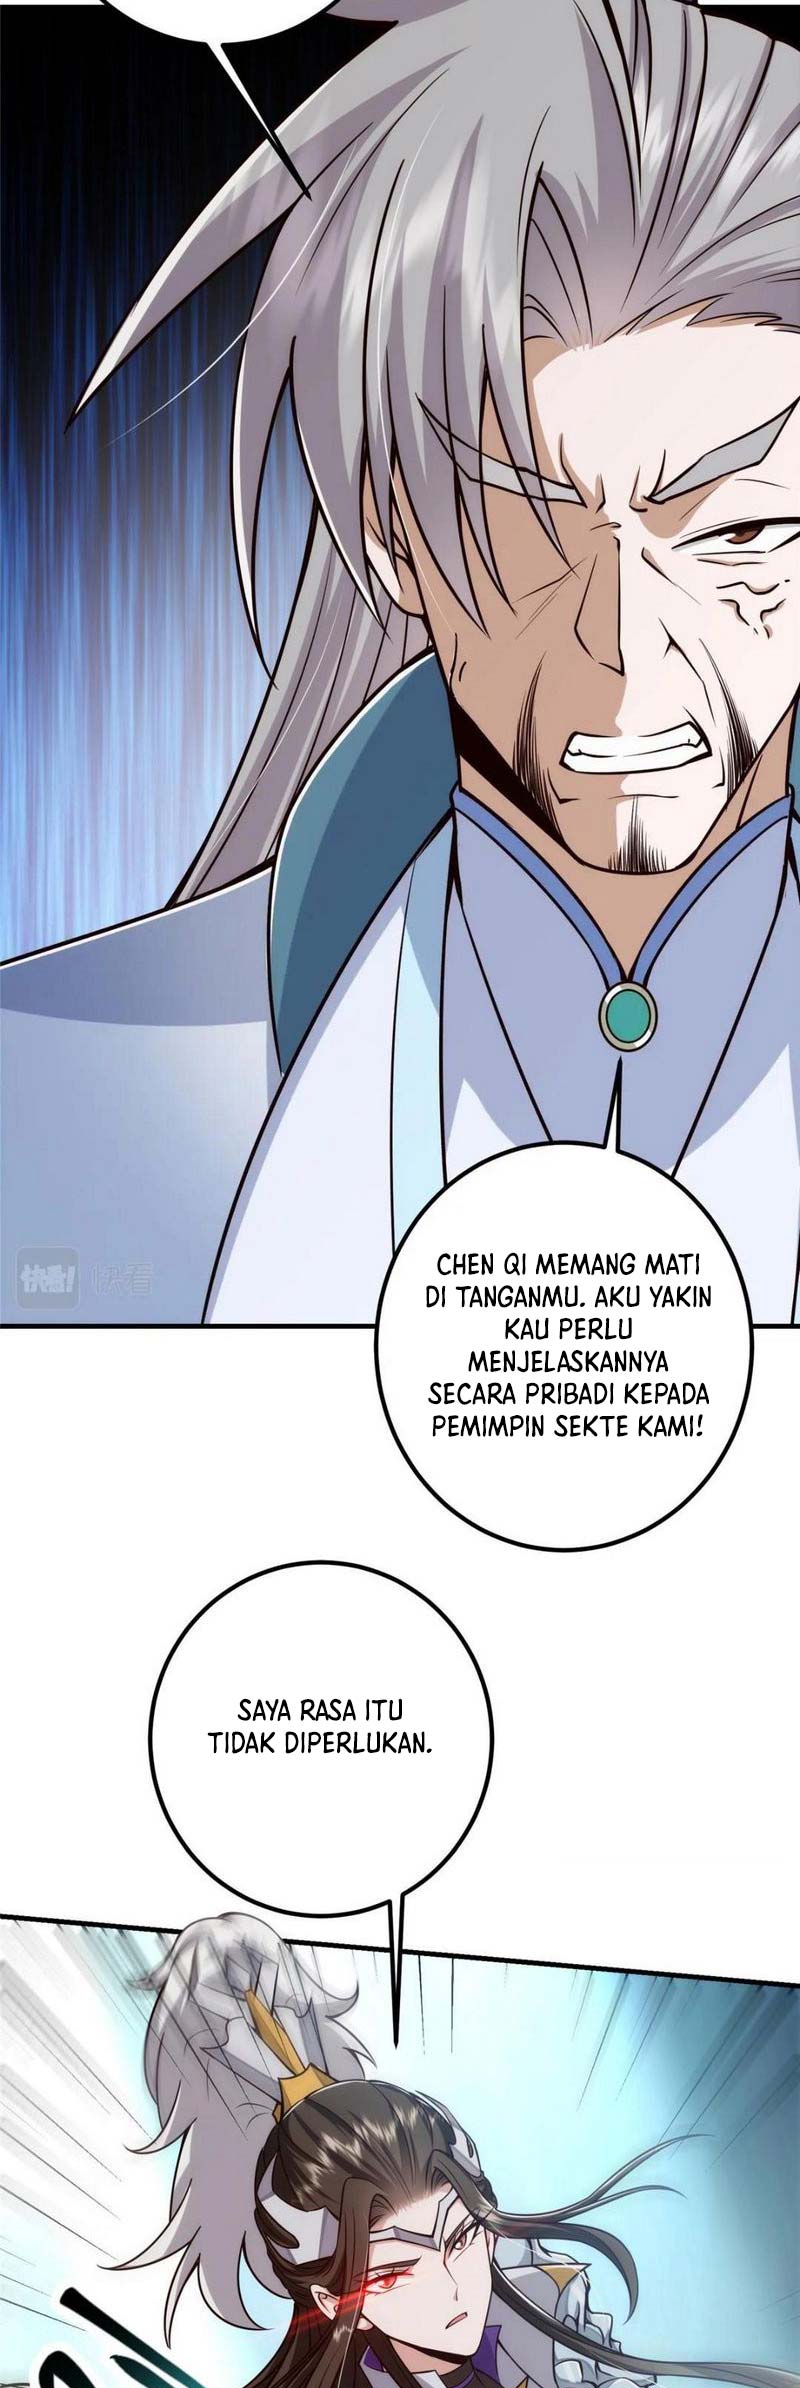 Keep A Low Profile, Sect Leader Chapter 222 Bahasa Indonesia